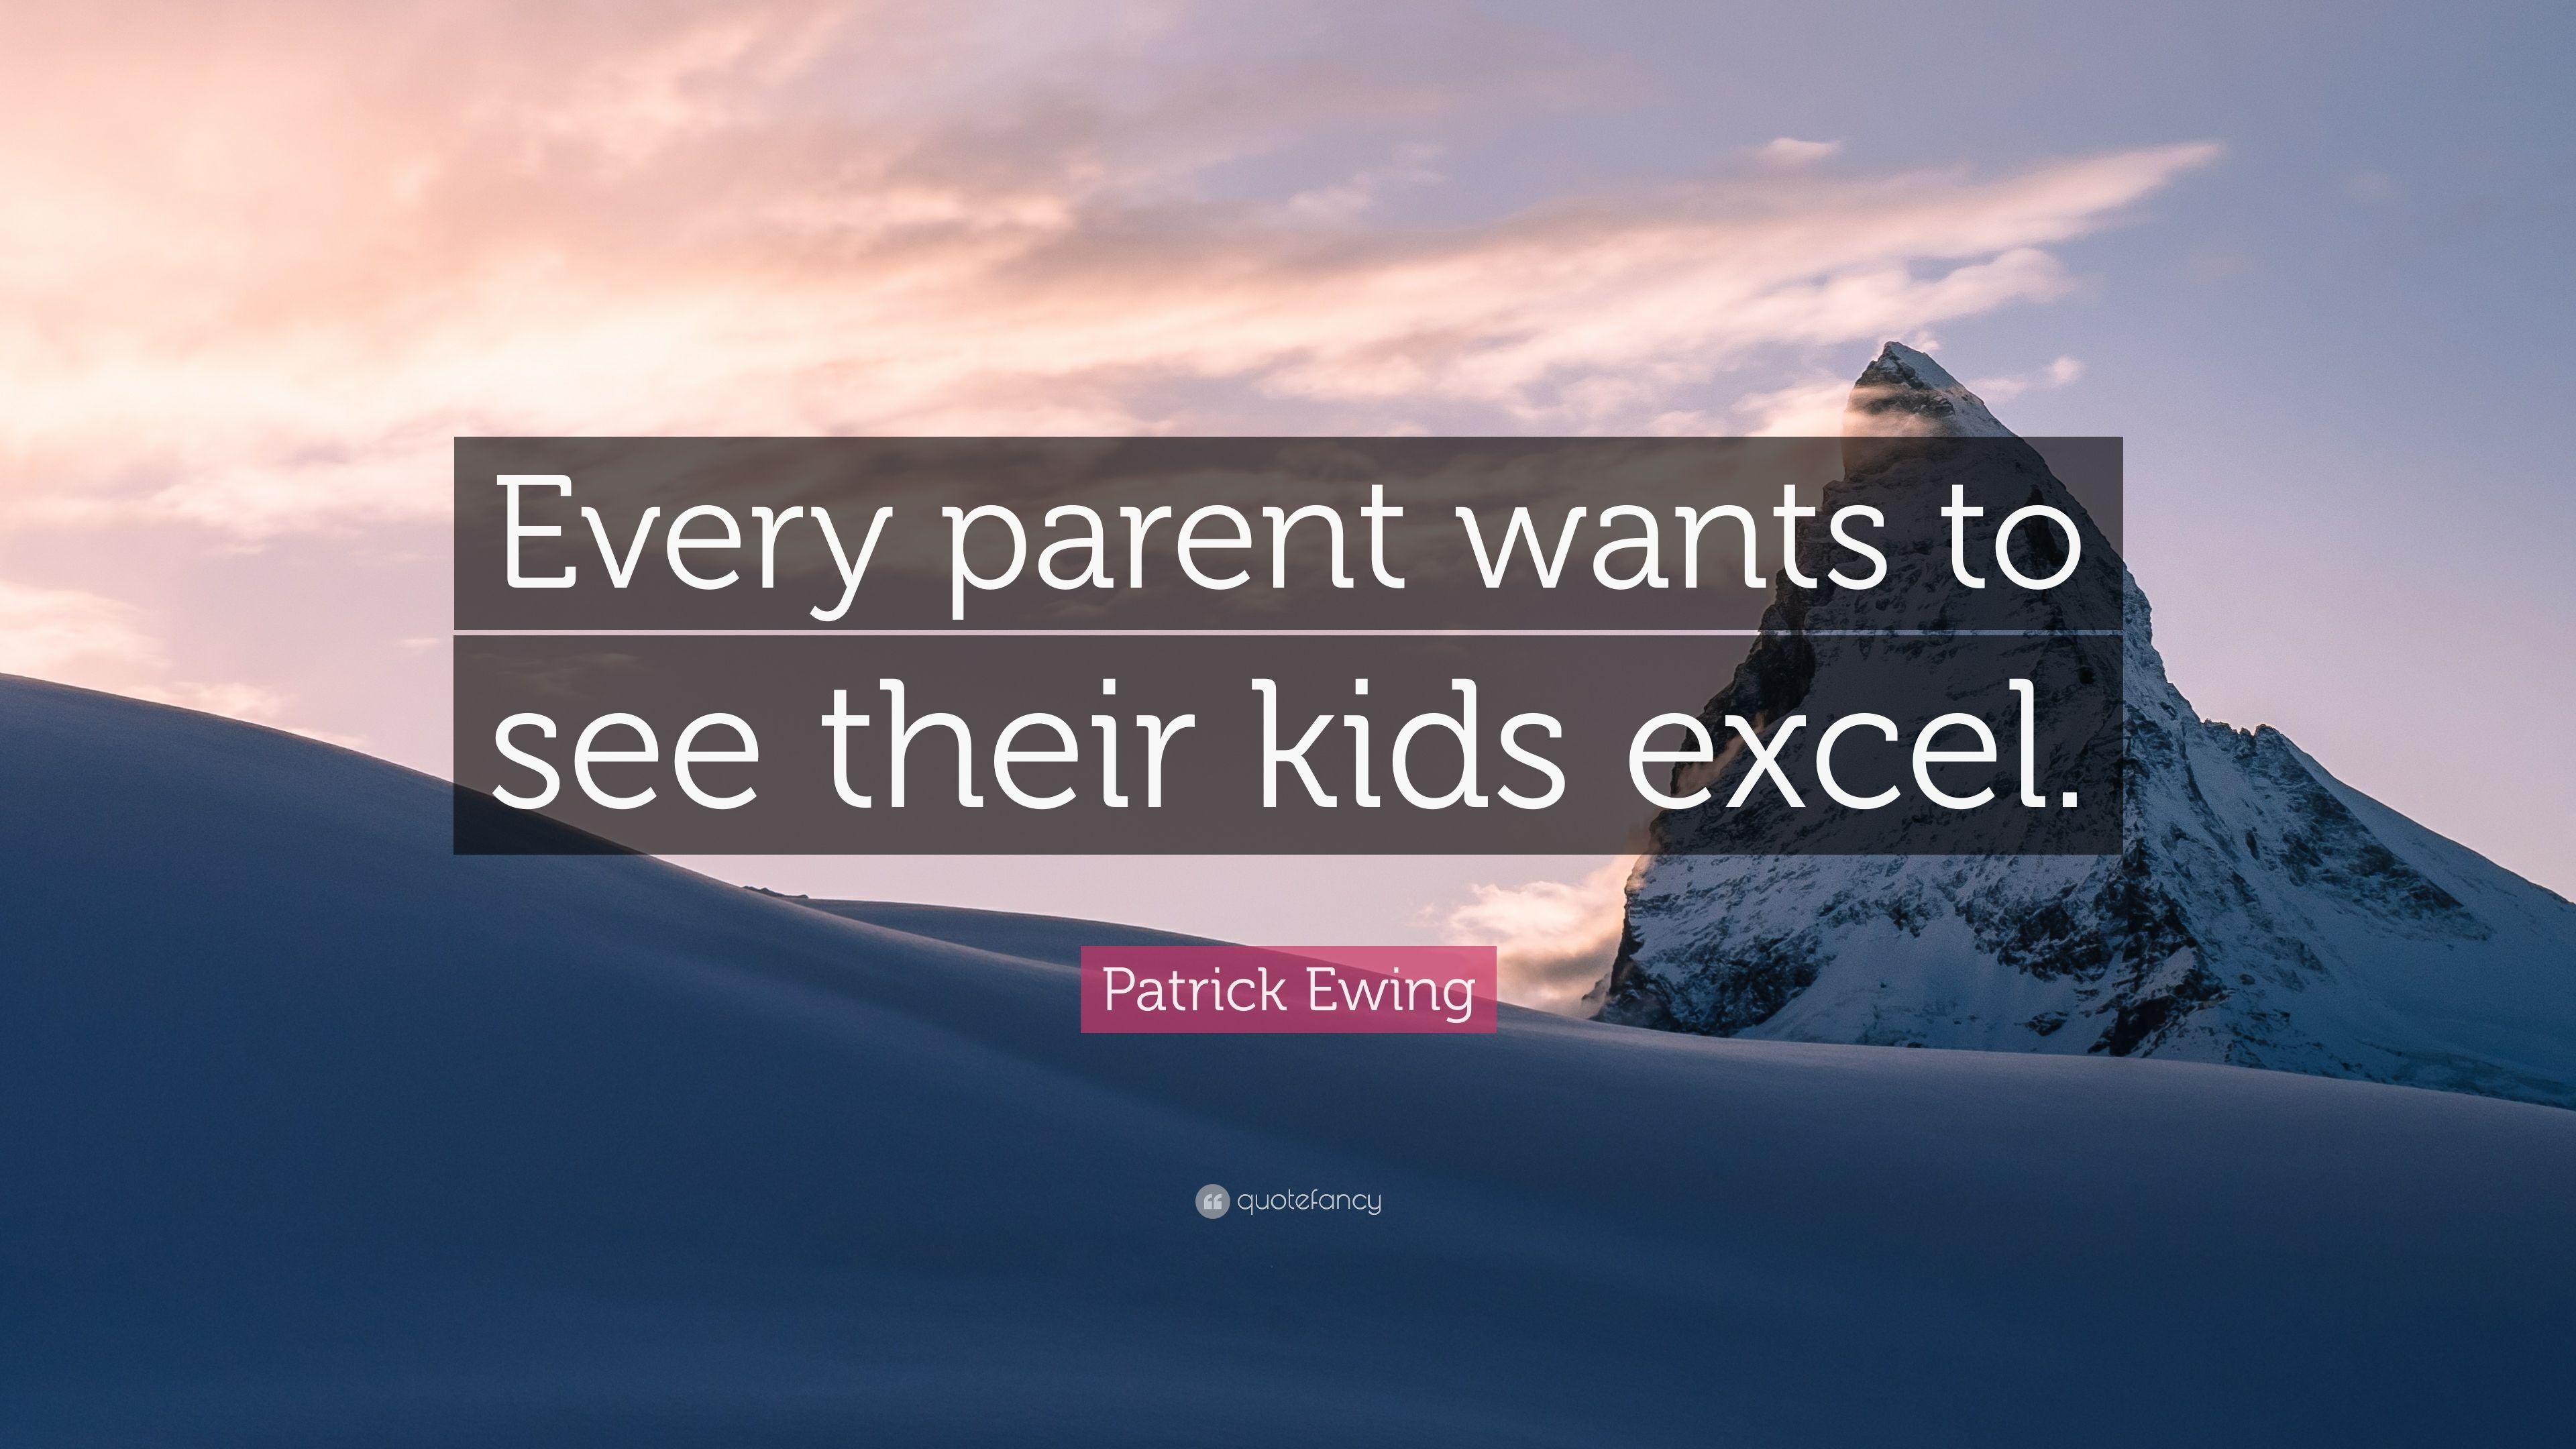 Patrick Ewing Quote: “Every parent wants to see their kids excel